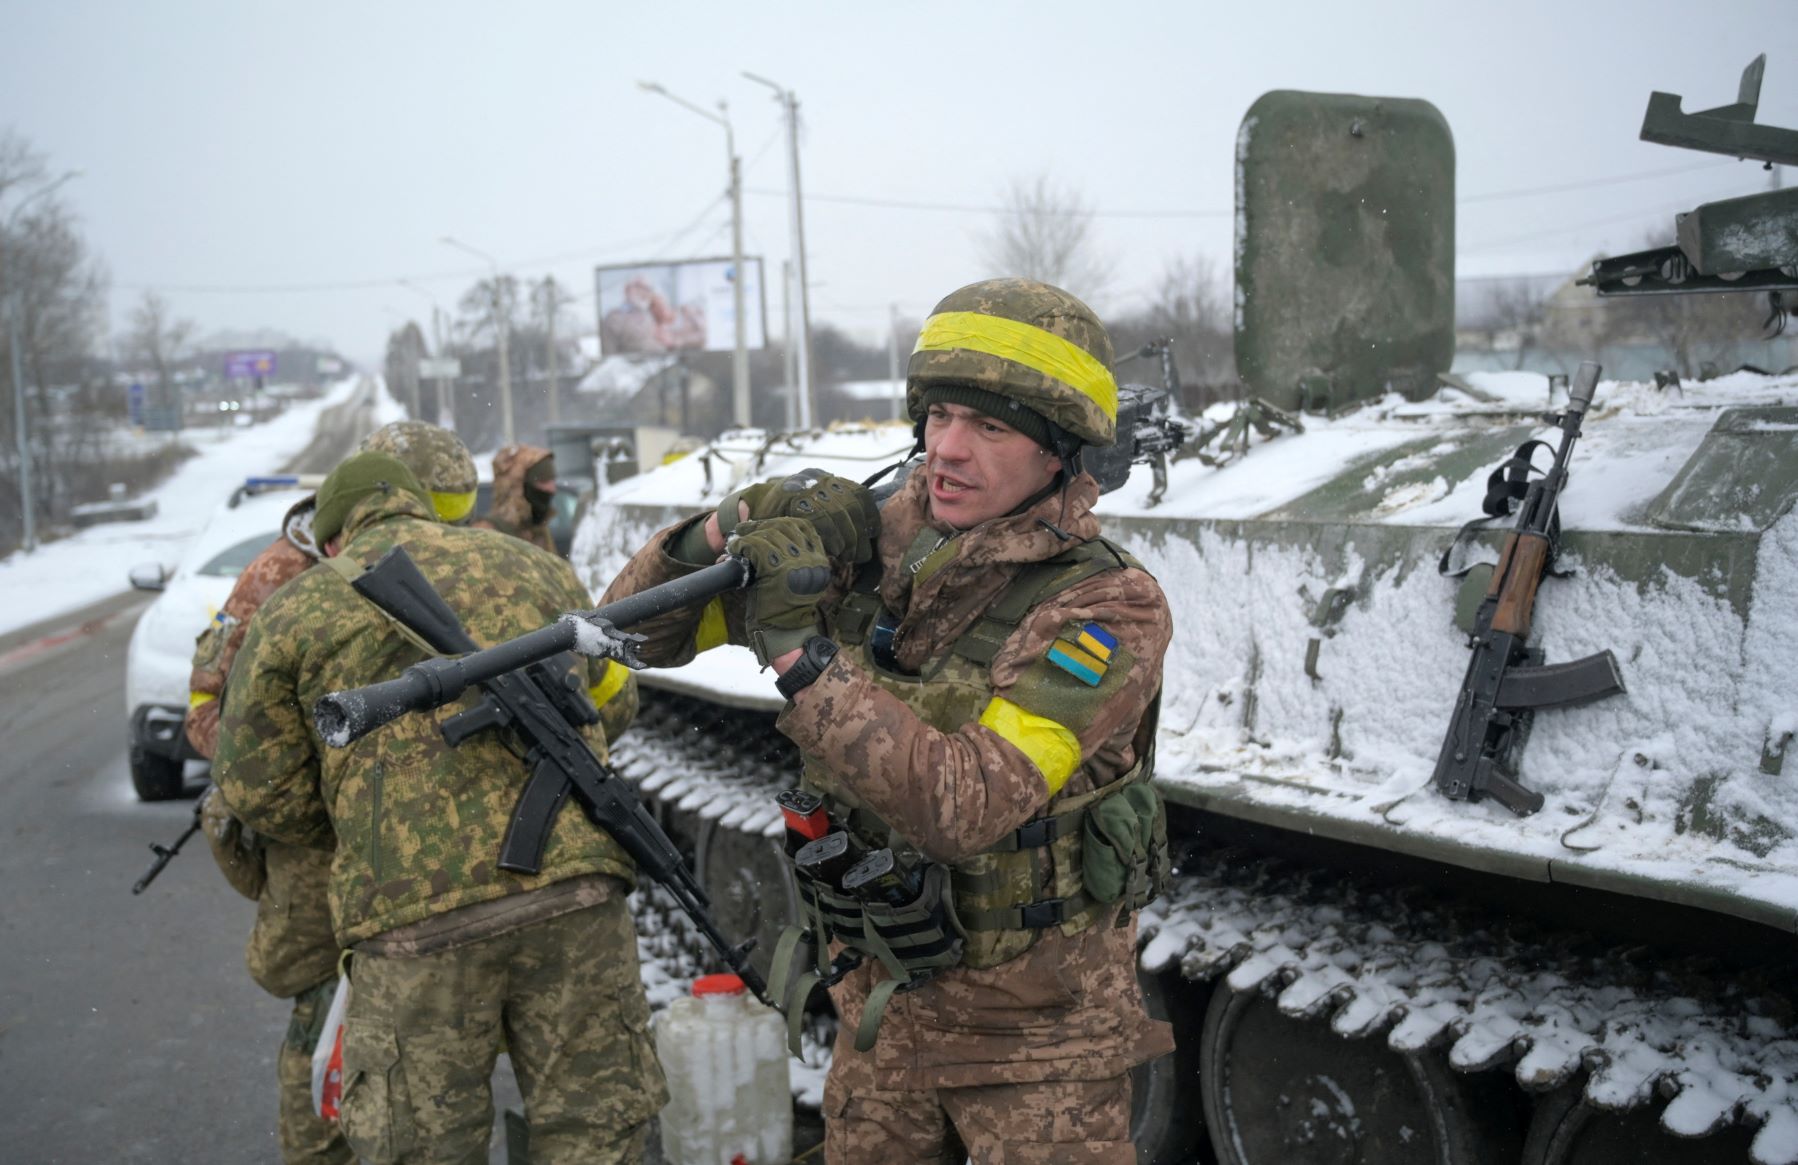 Ukrainian servicemen stand guard on a road in Kharkiv, Ukraine in front of a tank while holding weapons on February 25, 2022. REUTERS/Maksim Levin